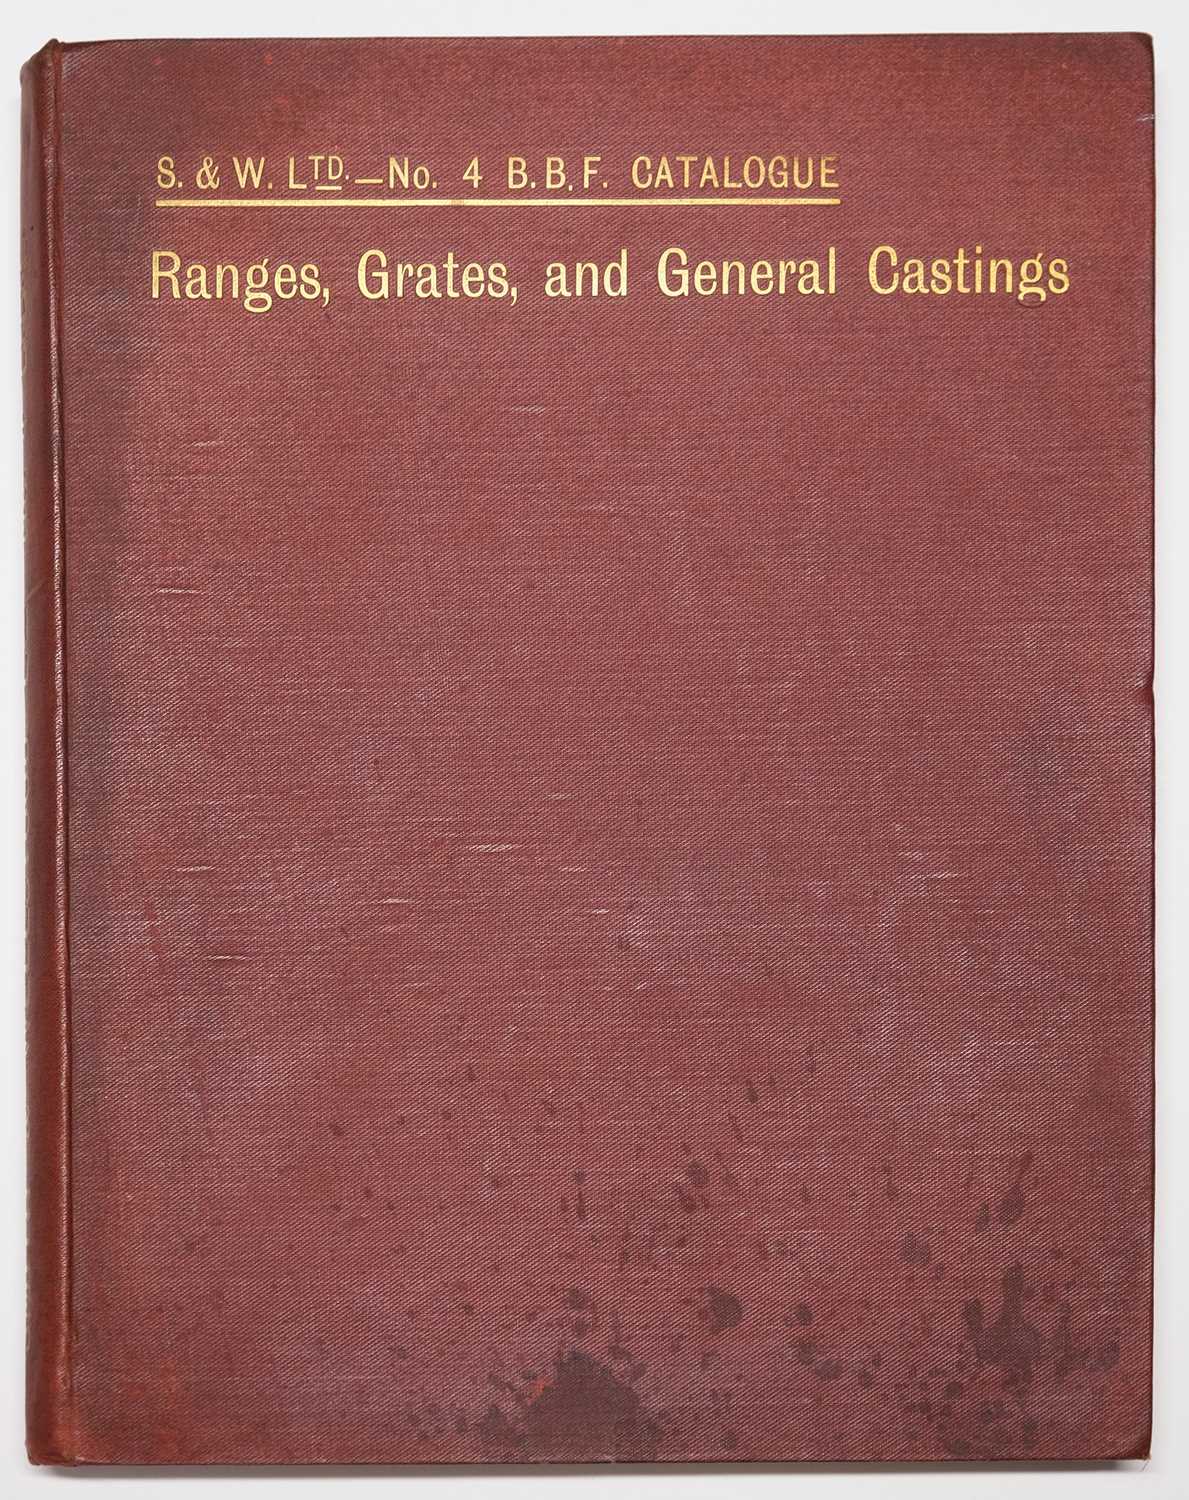 Lot 69 - Trade Catalogue. Smith & Wellstood's (Limited) Open and Close Fire Ranges, c.1880